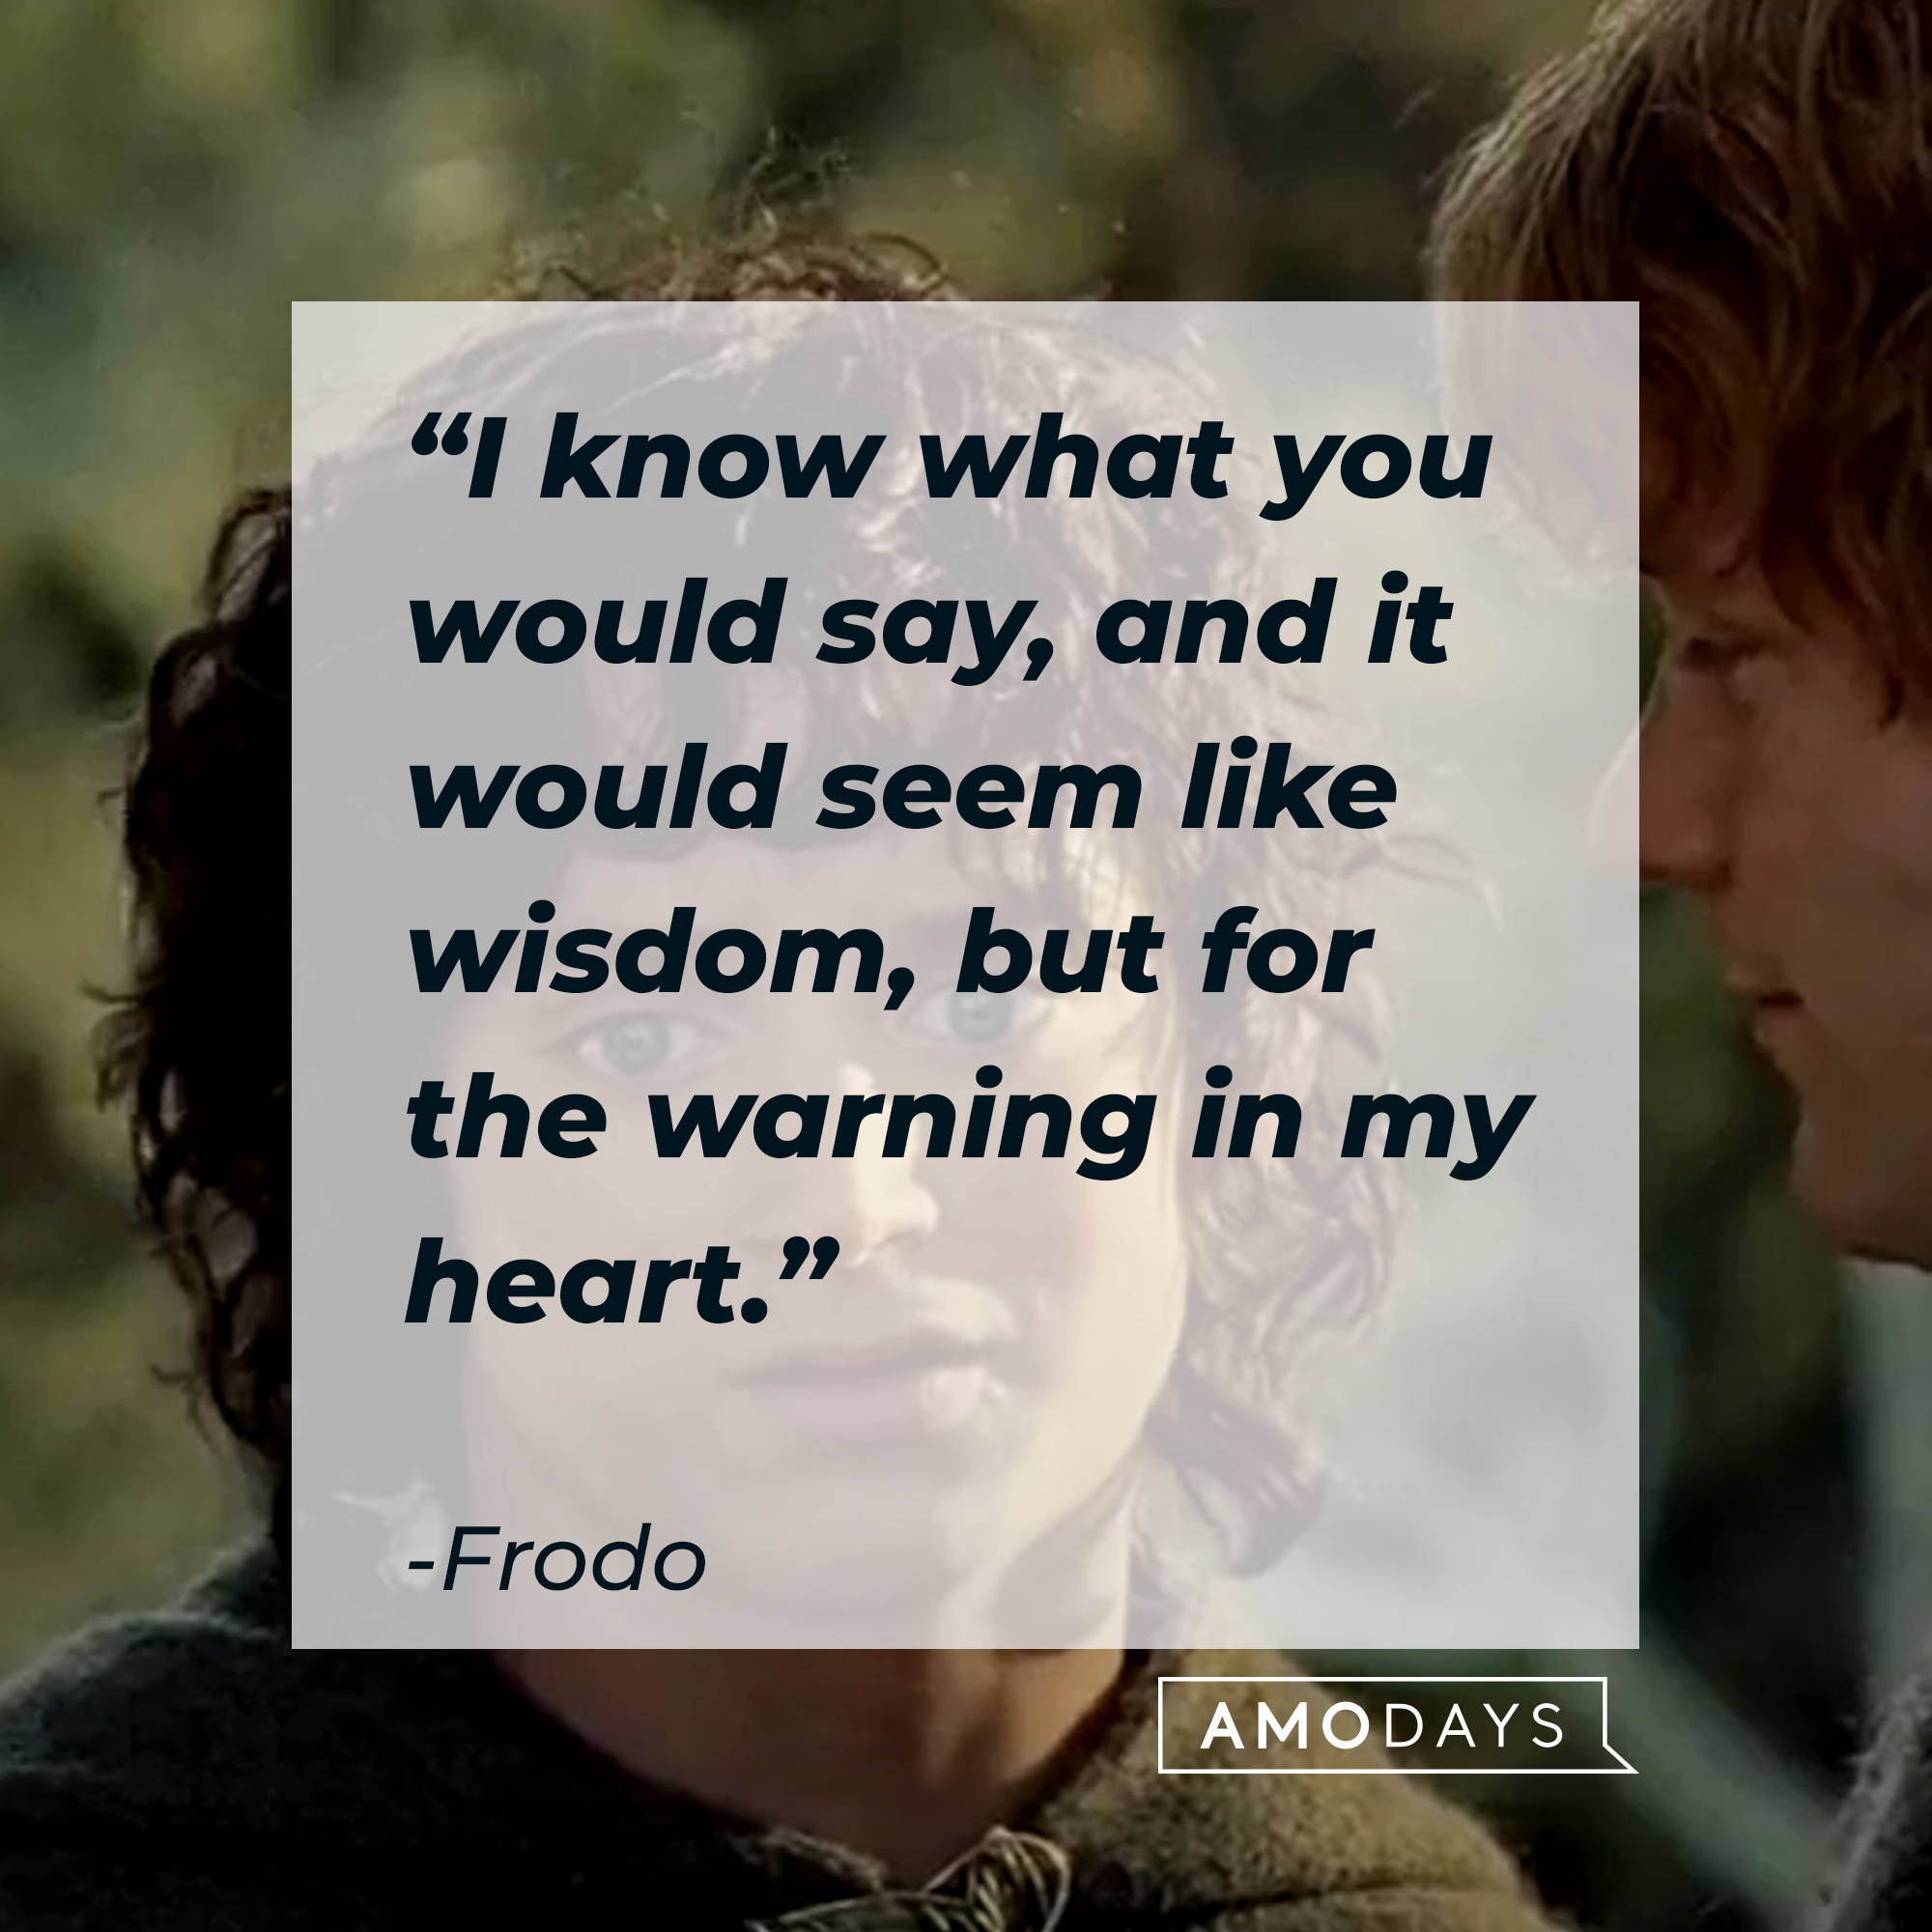 A photo of Frodo Baggins with the quote, "I know what you would say, and it would seem like wisdom, but for the warning in my heart." | Source: Facebook/lordoftheringstrilogy